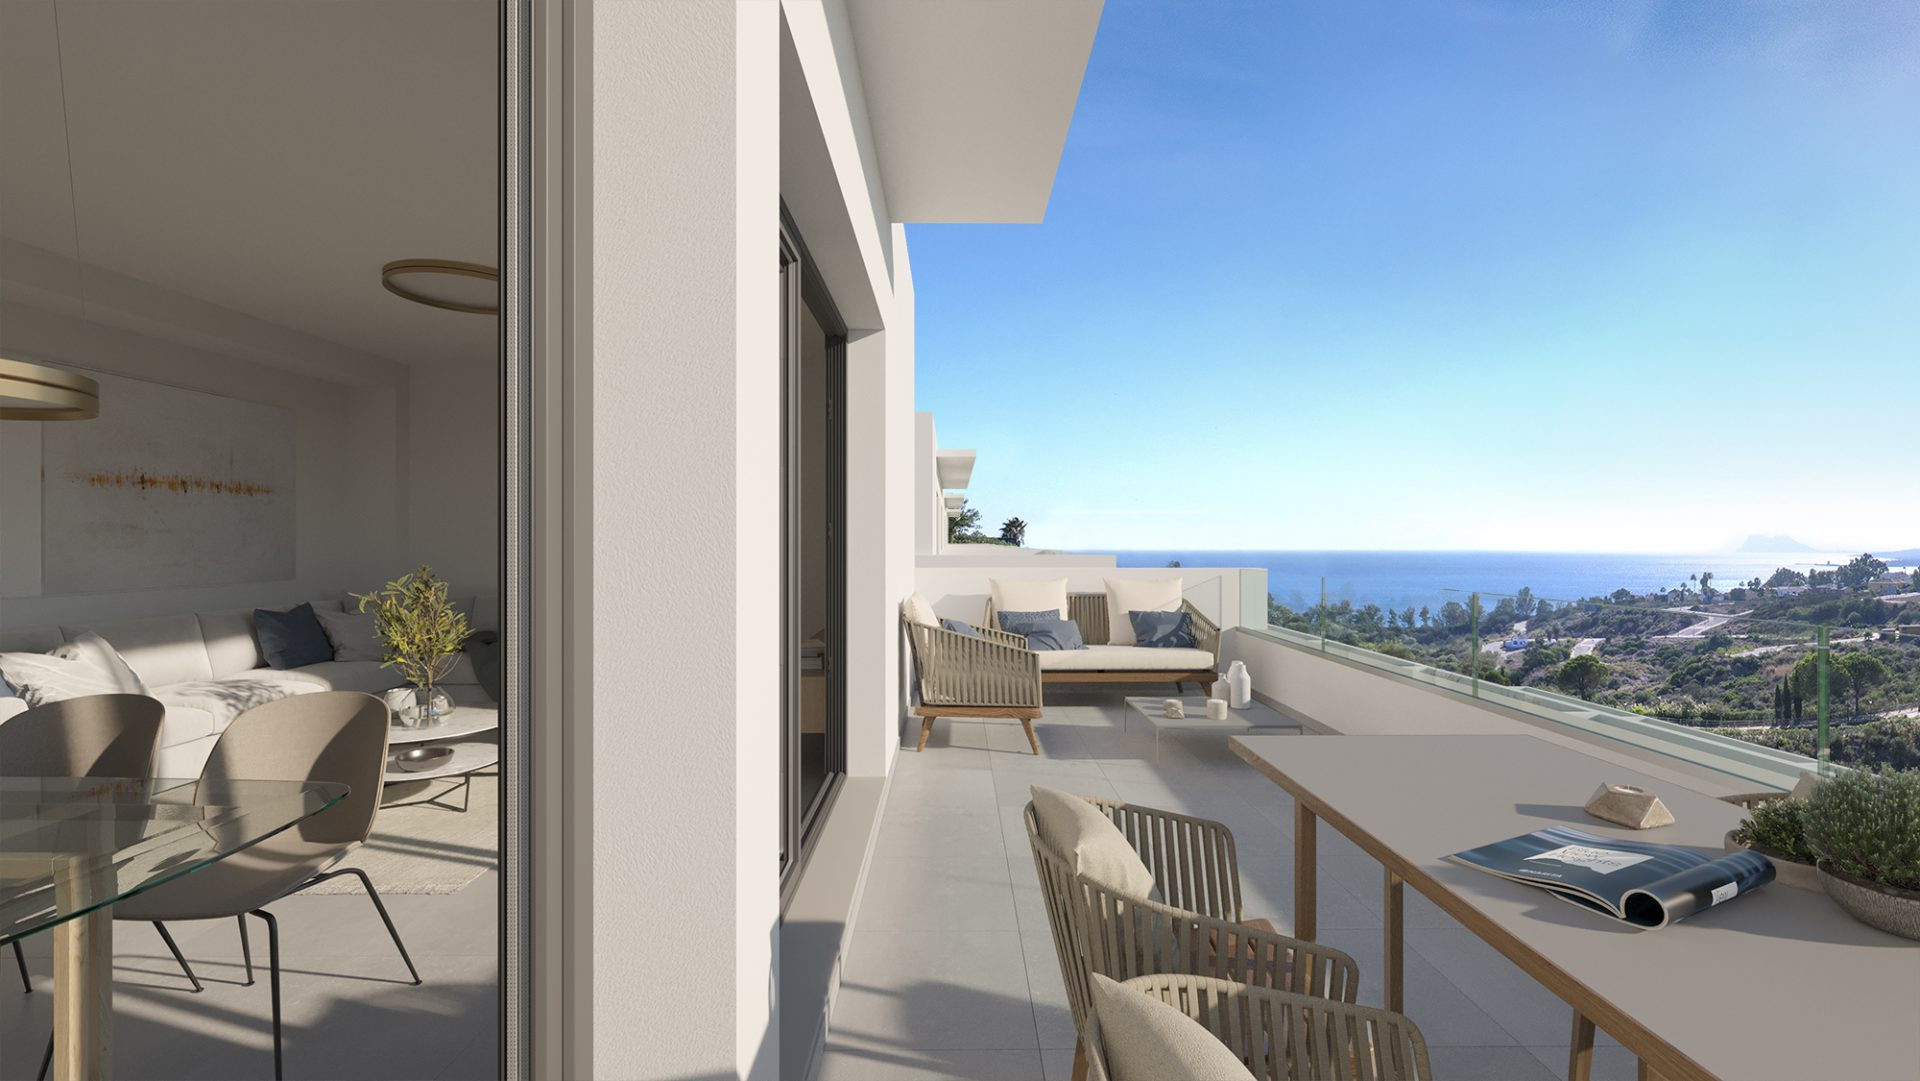 Luxurious townhouse with terrace and private garden in Manilva. | Image 3